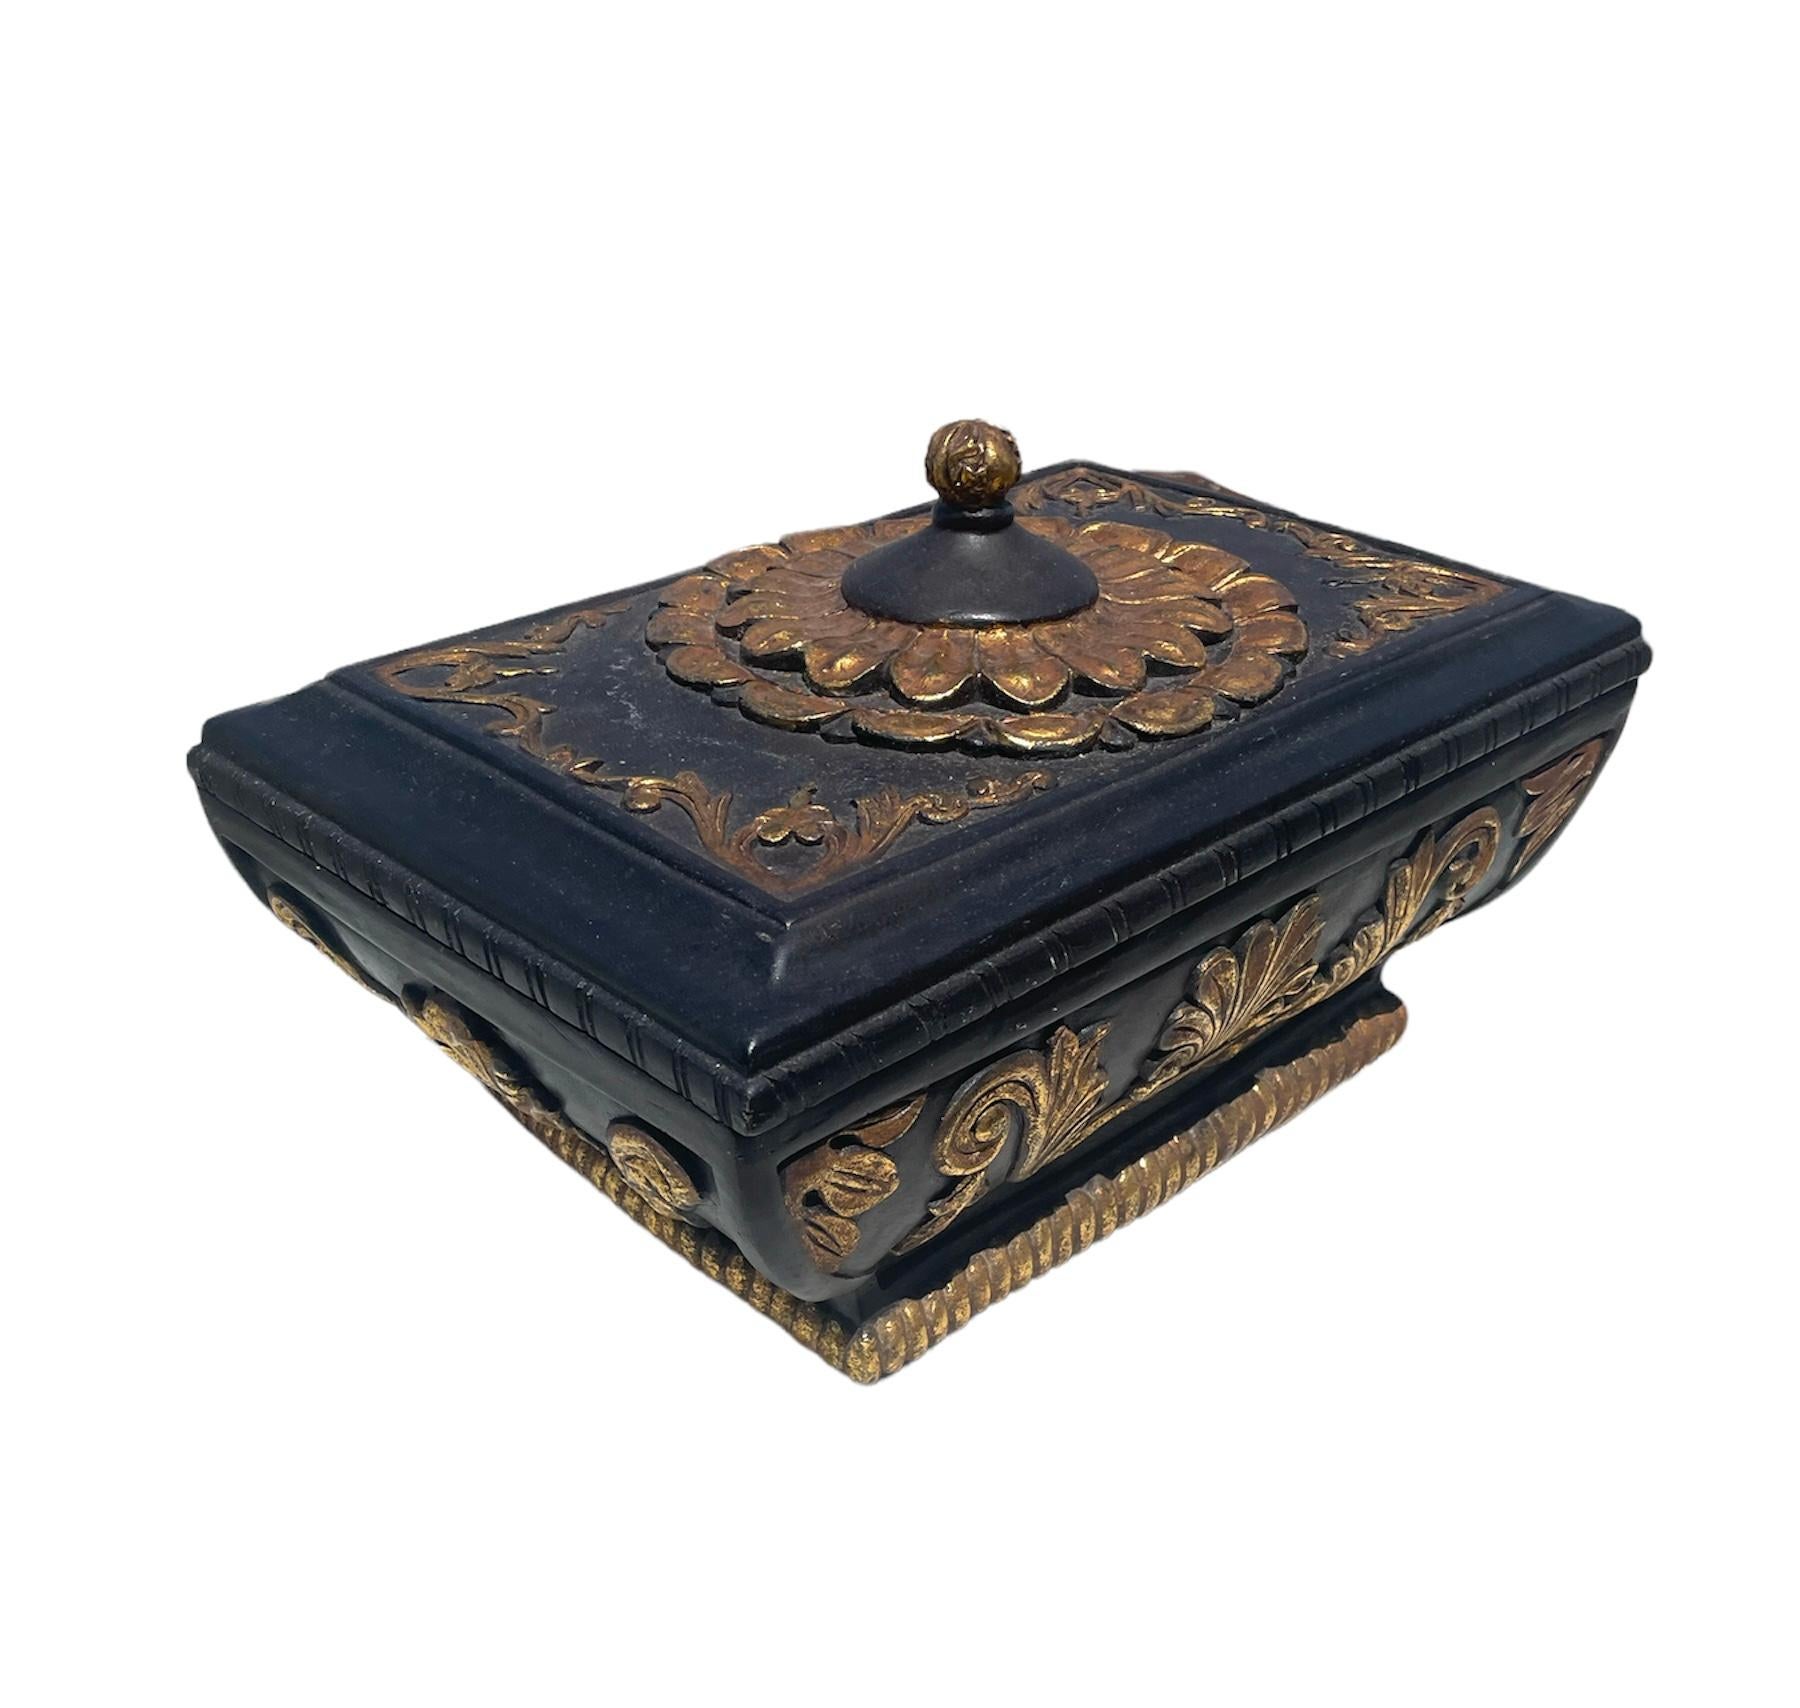 This is a very unique black wooden box with gold hand painted gilt.
The wood is thick in the structure is carved beautifully it’s feels like your holding a box for the crown jewels. Definitely a statement piece and can be used in Practical lifestyle